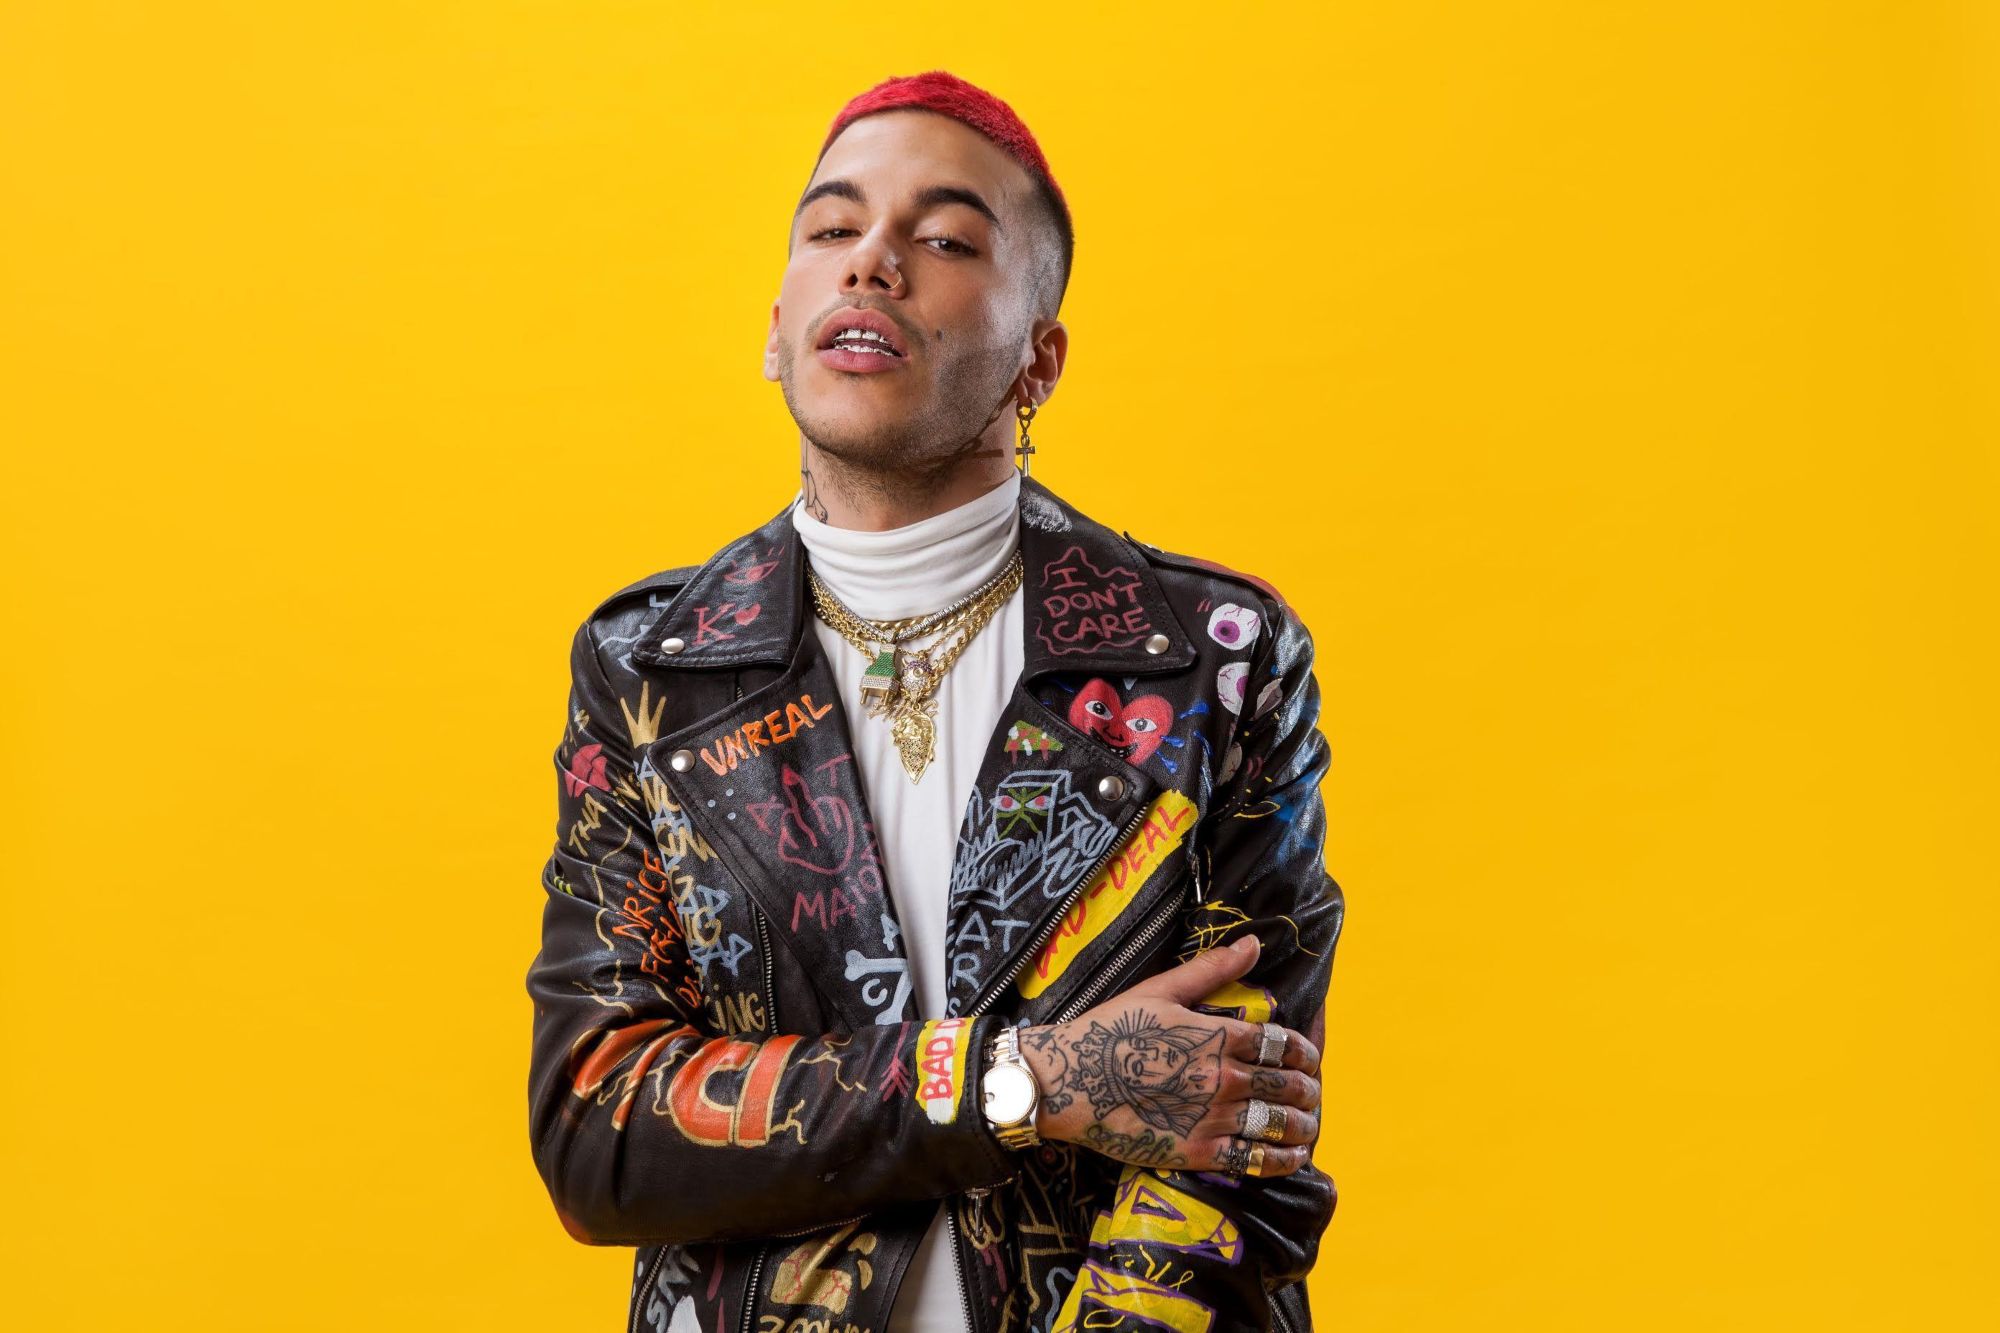 Meaning of Visiera a Becco by Sfera Ebbasta